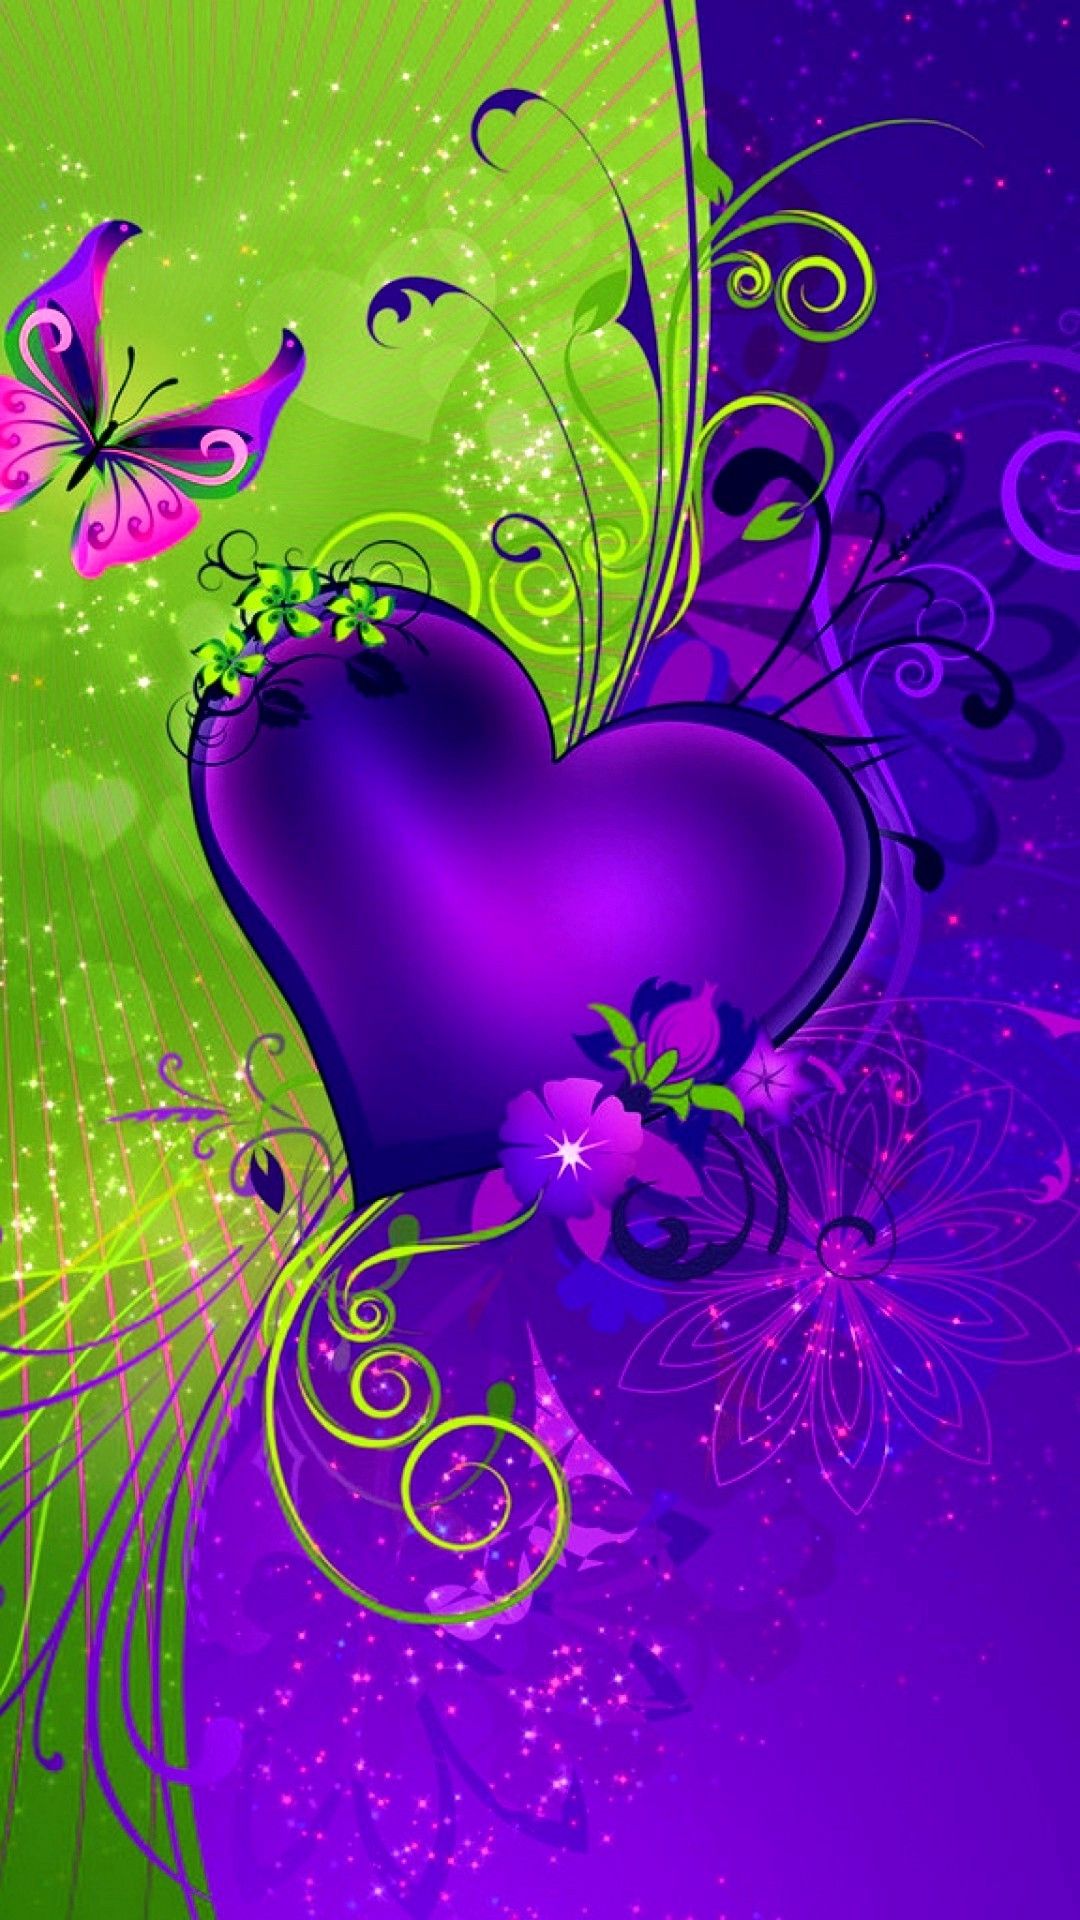 best girly wallpapers,purple,violet,graphic design,butterfly,plant